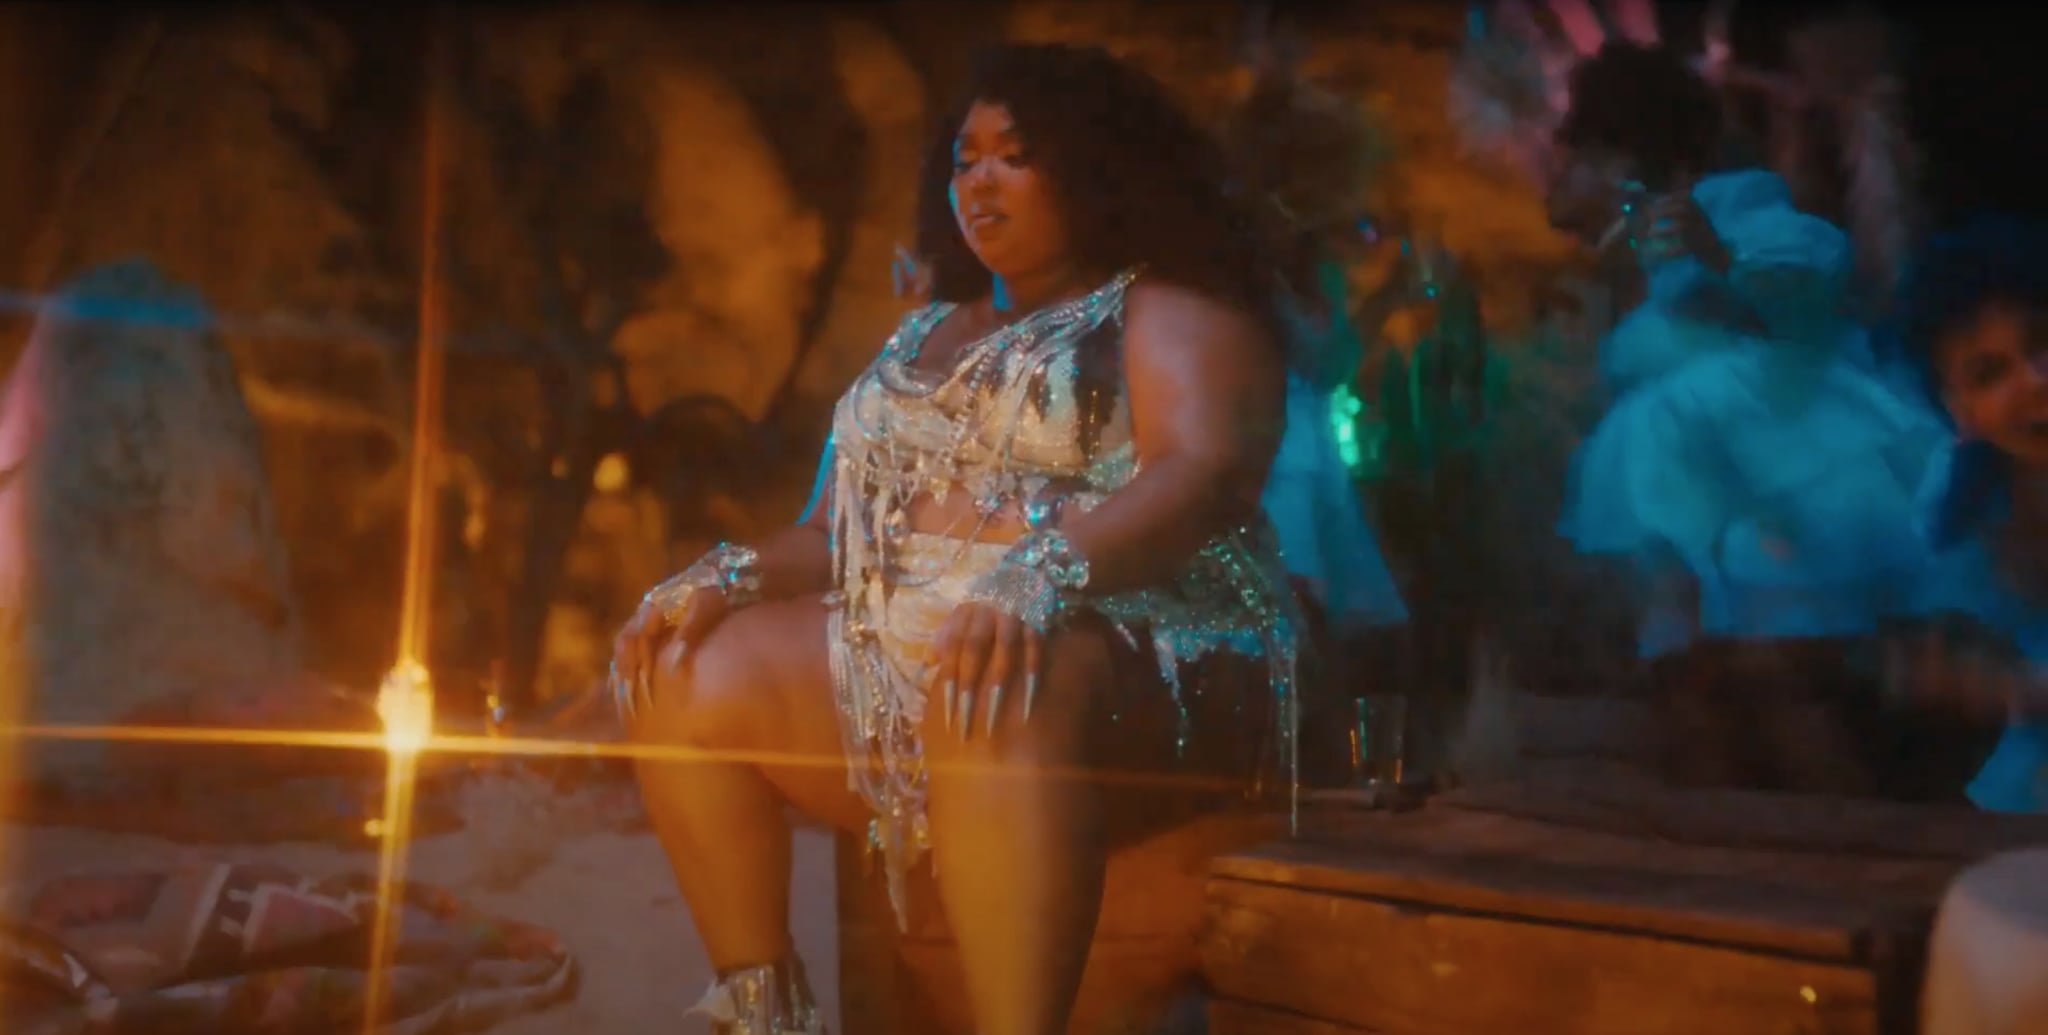 Lizzo's Wedding Dress in the 2 Be Loved Music Video